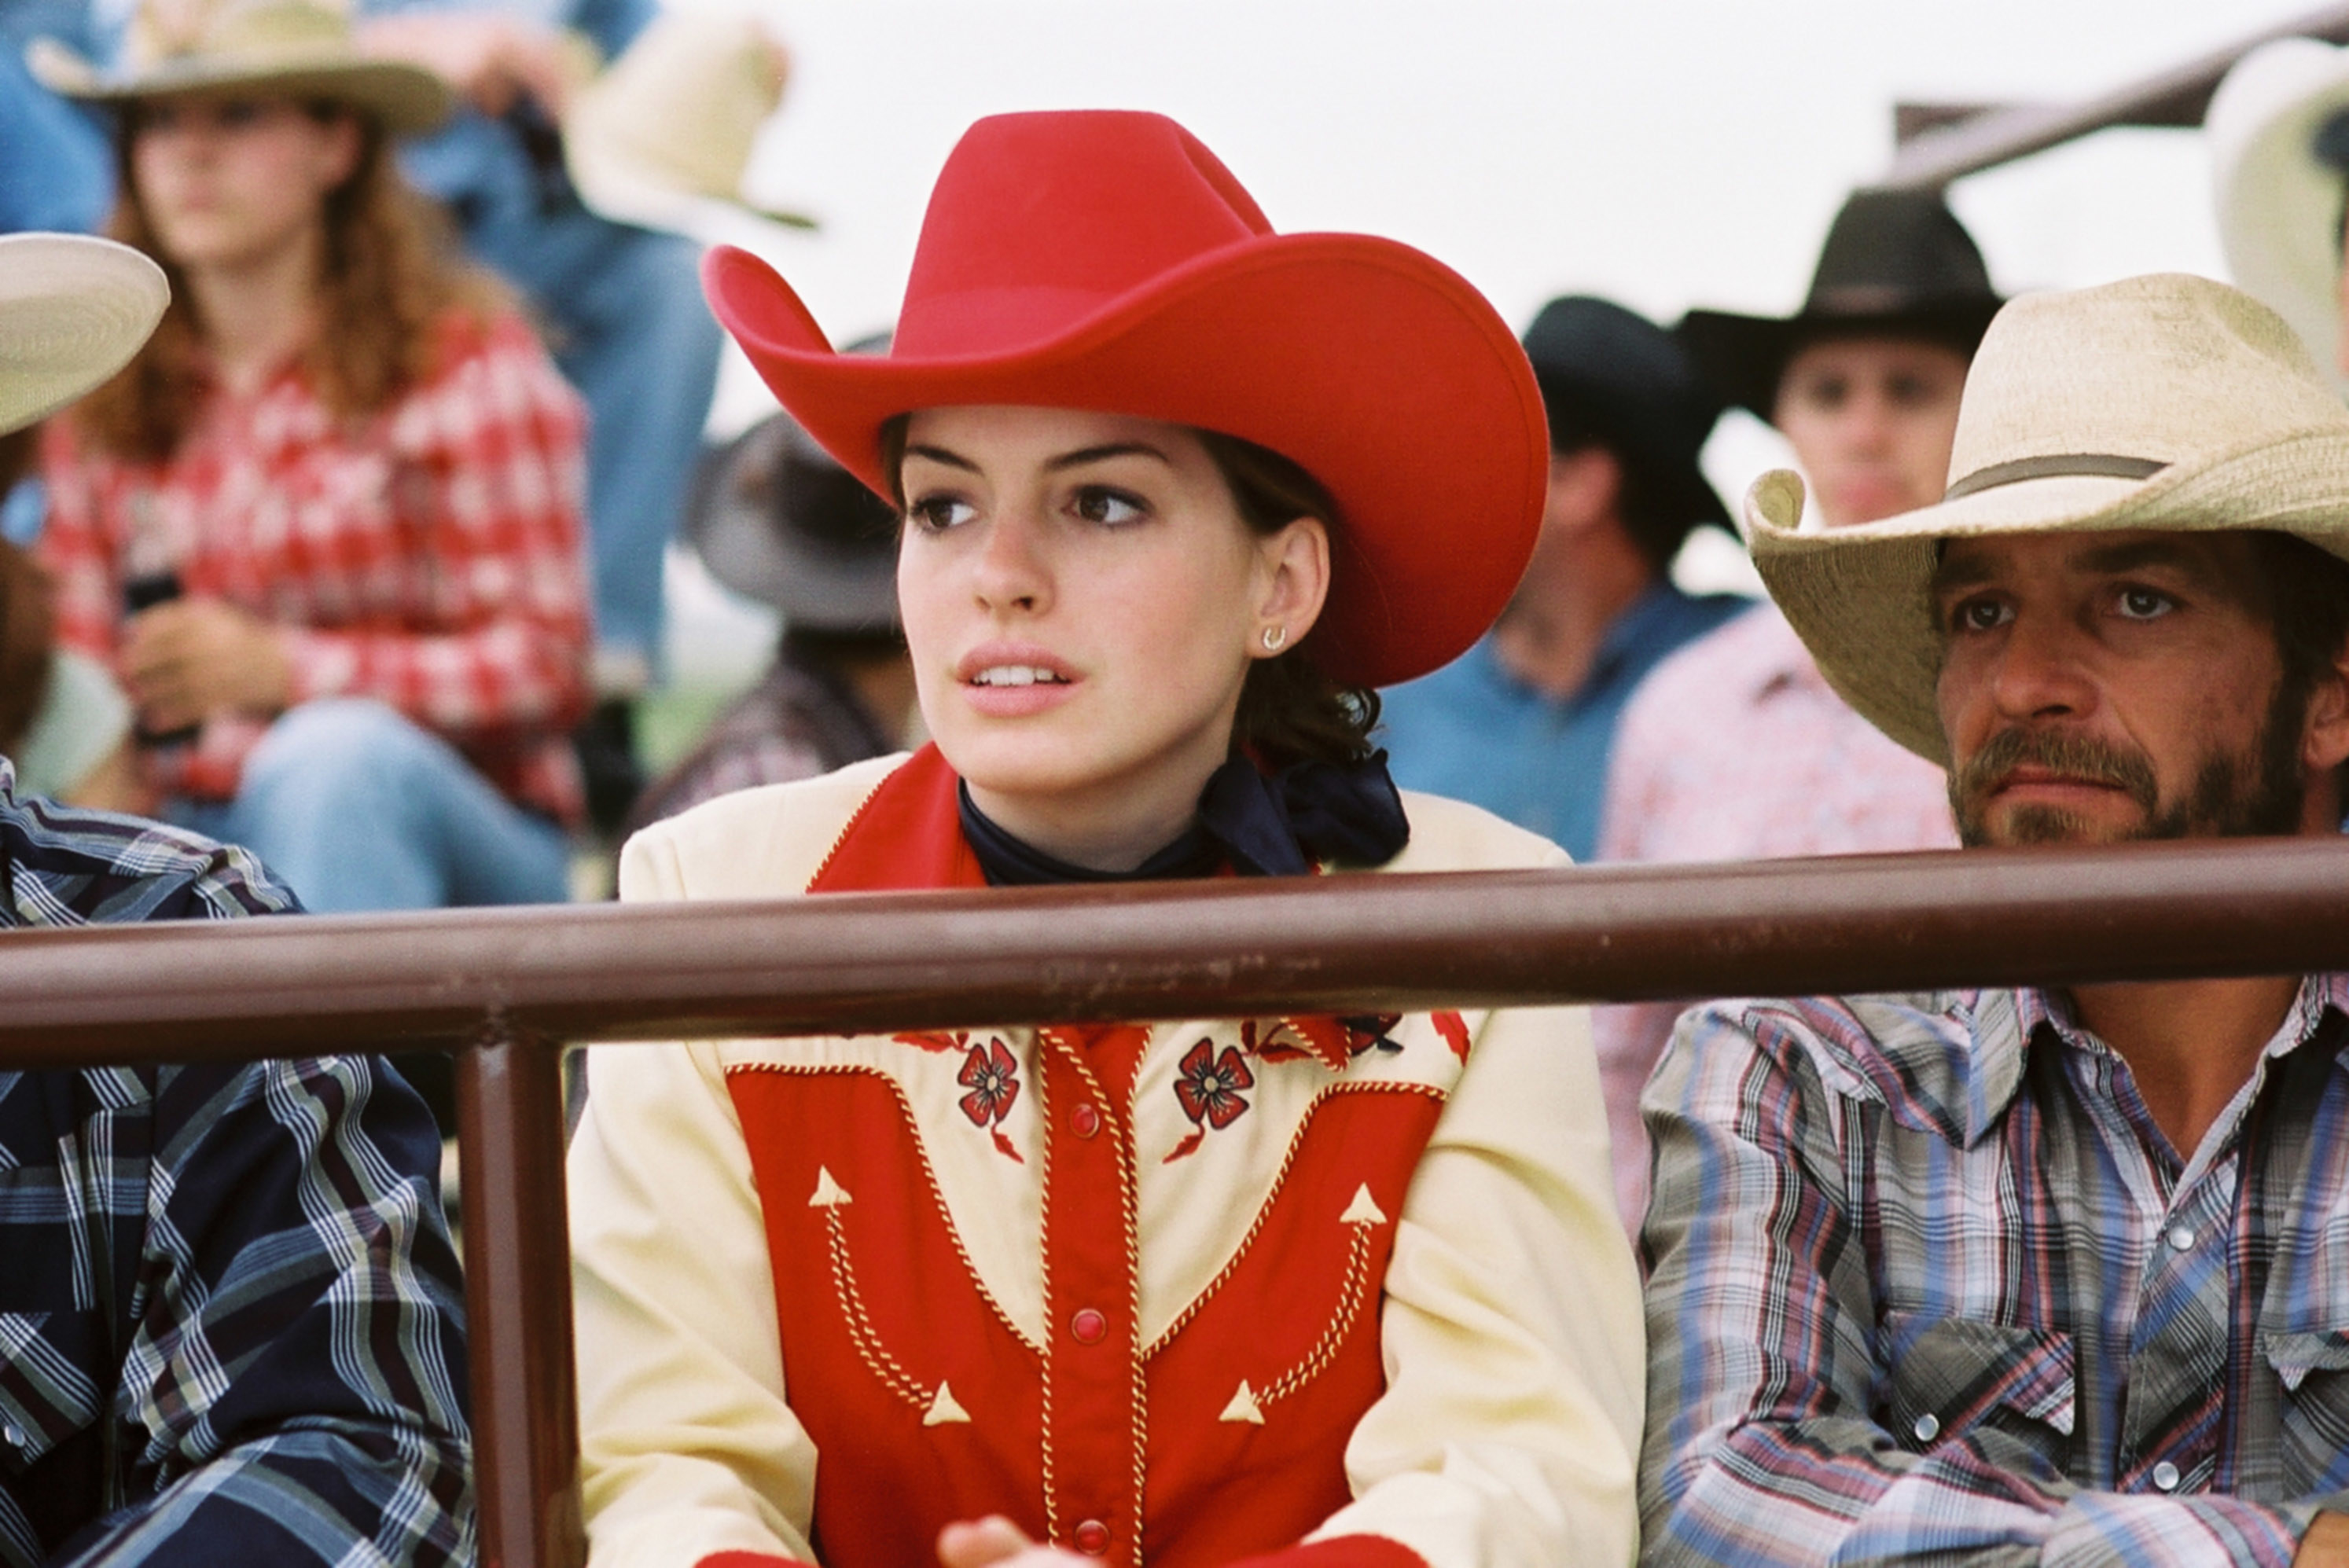 Hathaway at the rodeo